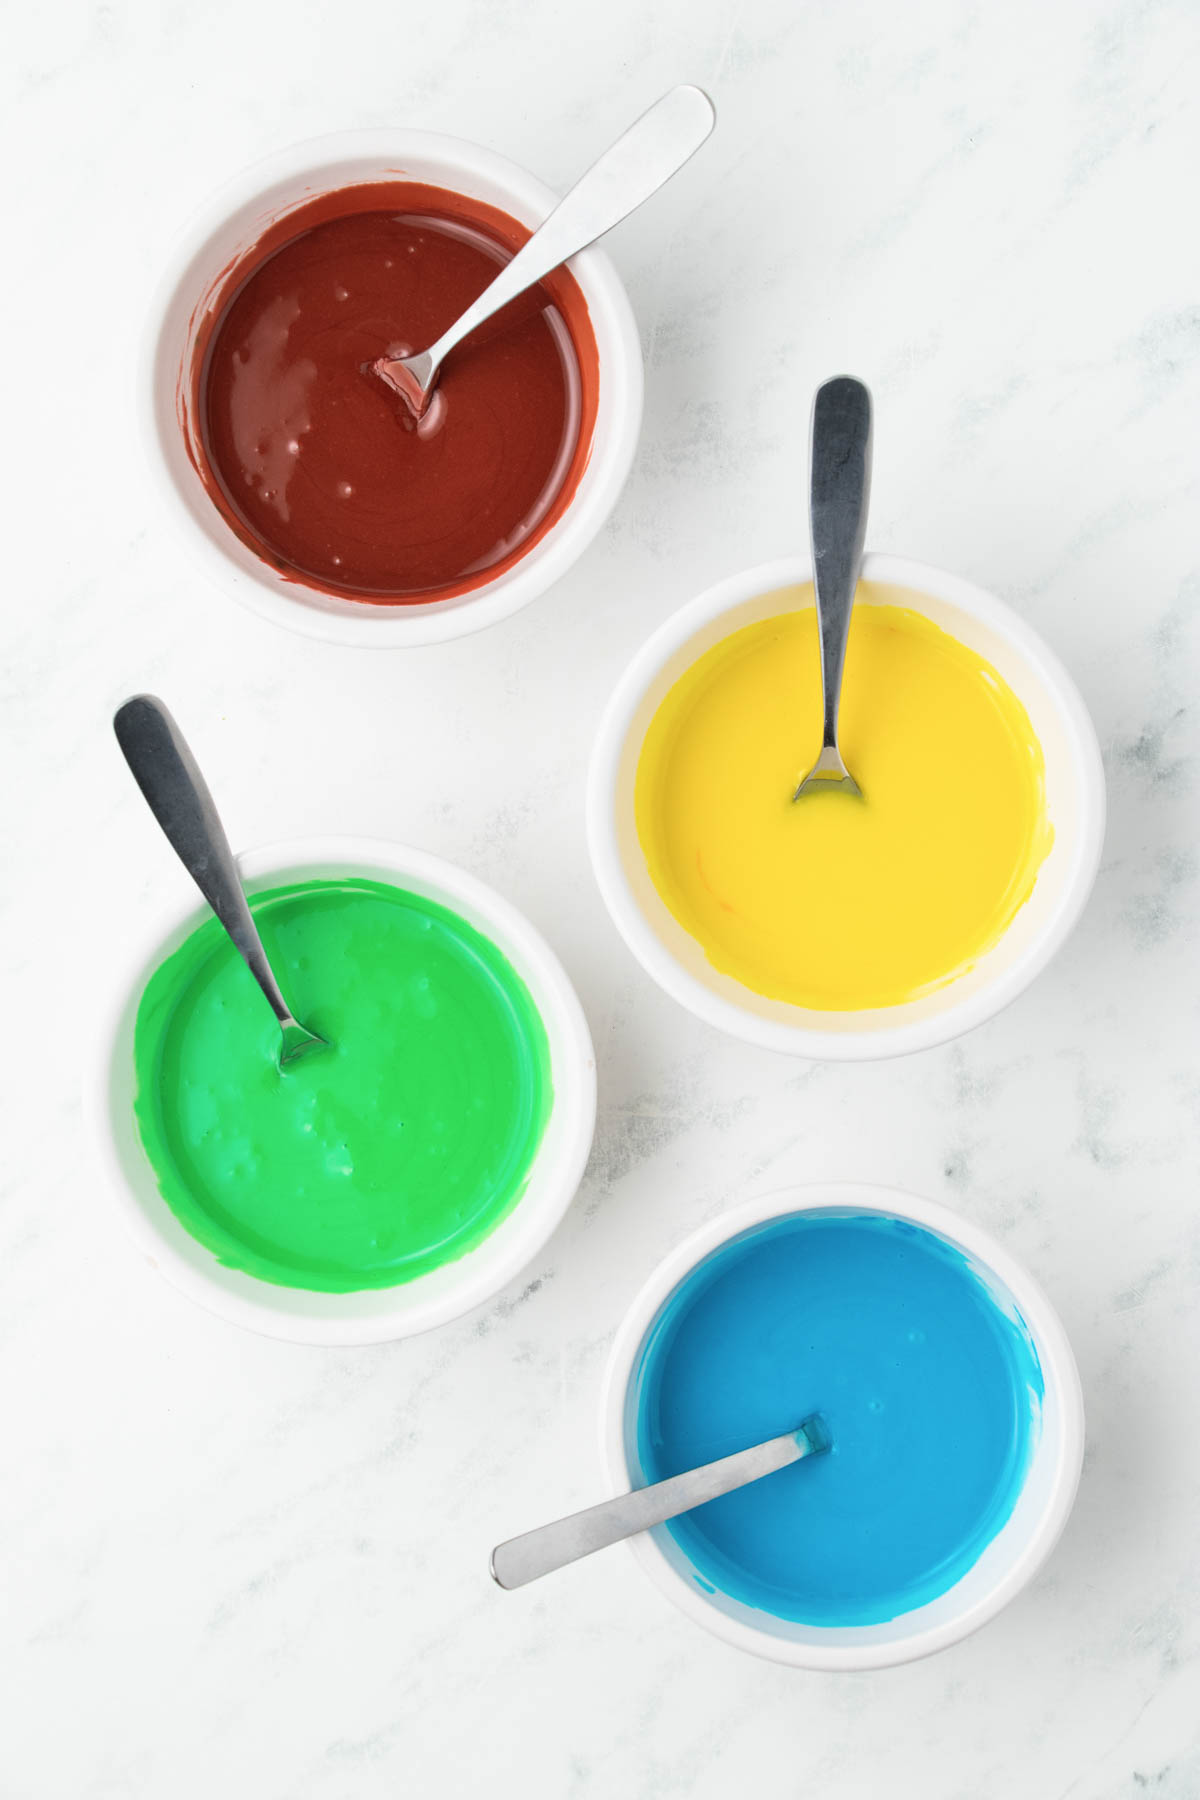 Four bowls with different colors of icing in them.